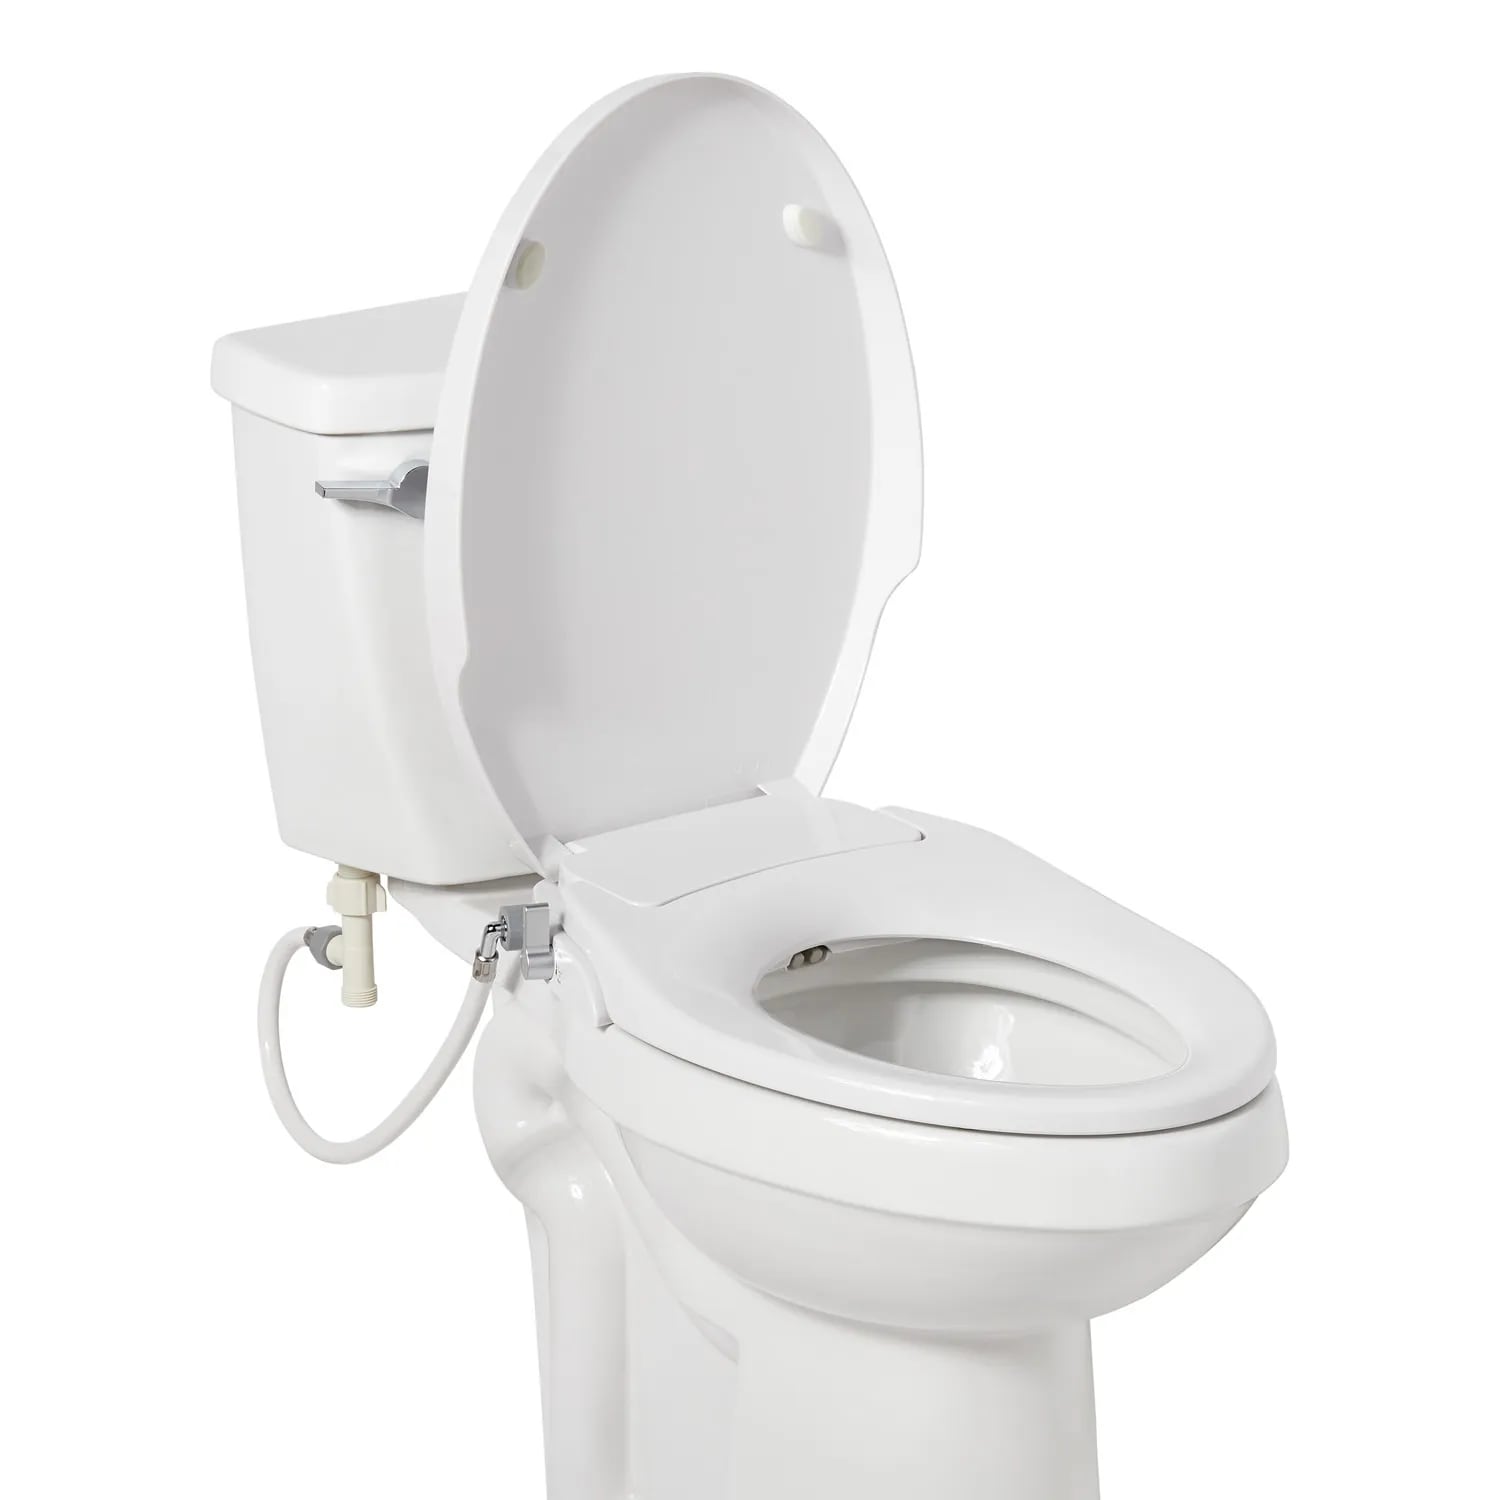 Signature Brookdale Plastic White Elongated Soft Close Bidet Toilet Seat in the Toilet Seats department at Lowes.com